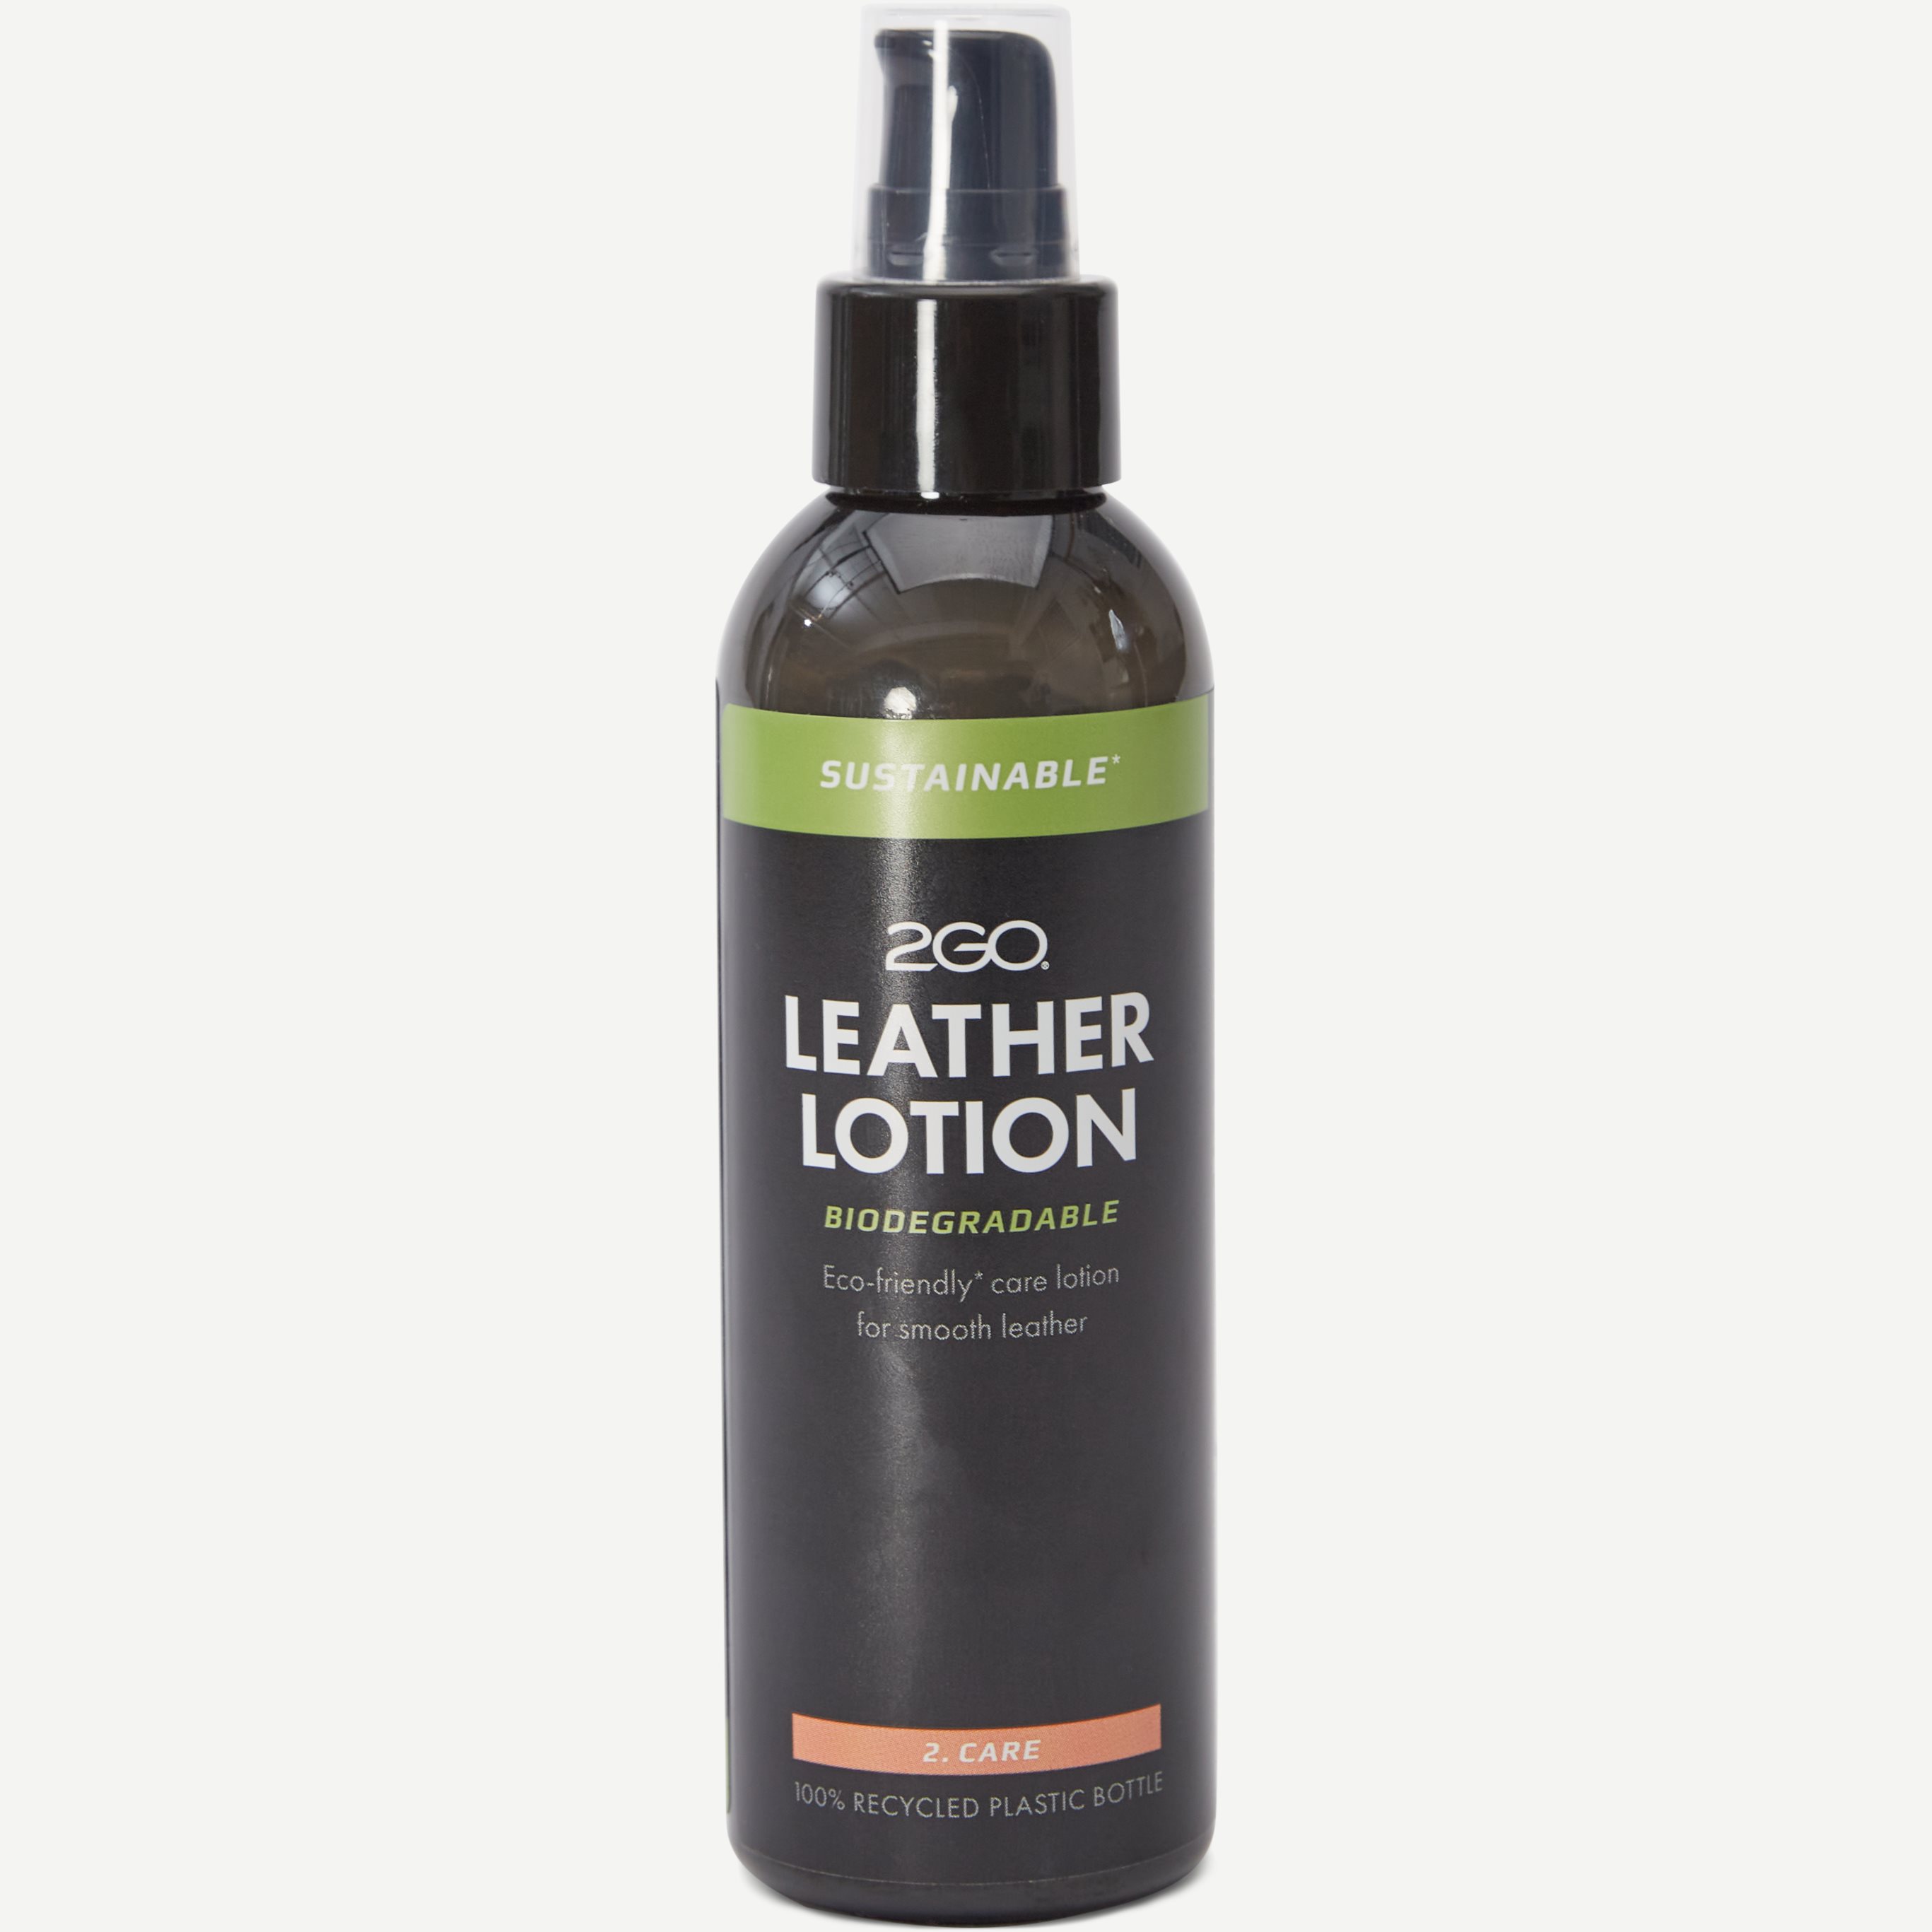 Woly Protector Accessories 2GO LEATHER LOTION White